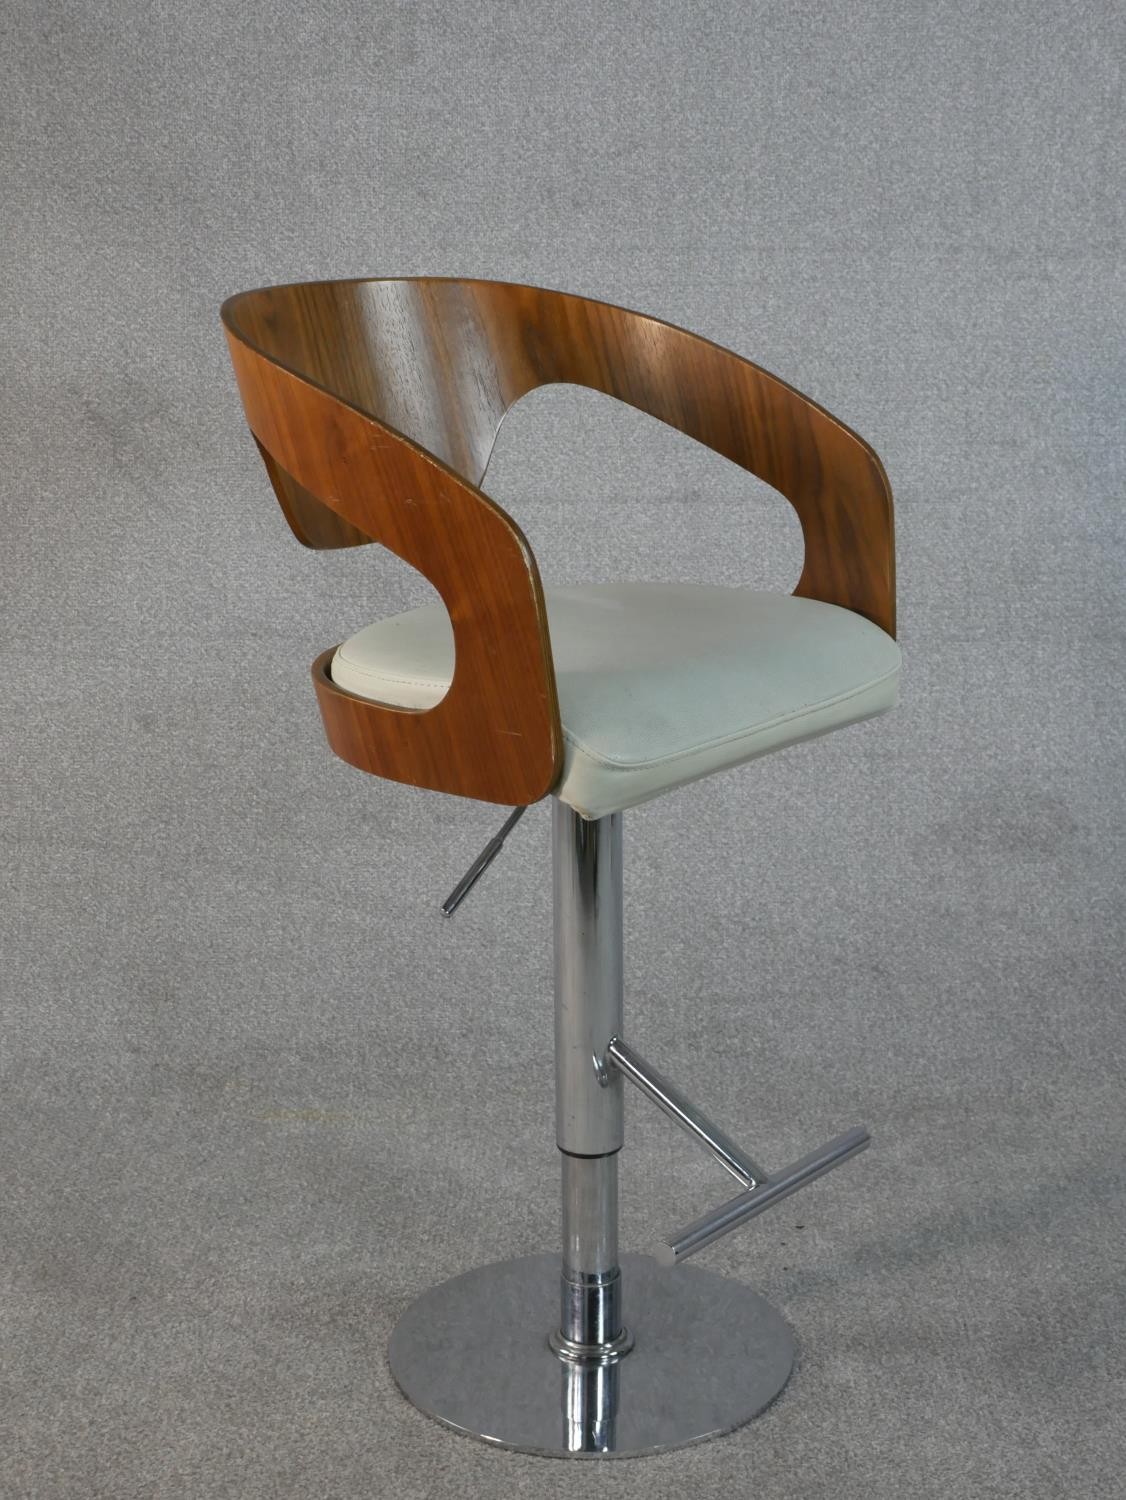 A contemporary adjustable height bar stool, with a curved walnut back and a white leather seat on - Image 3 of 3